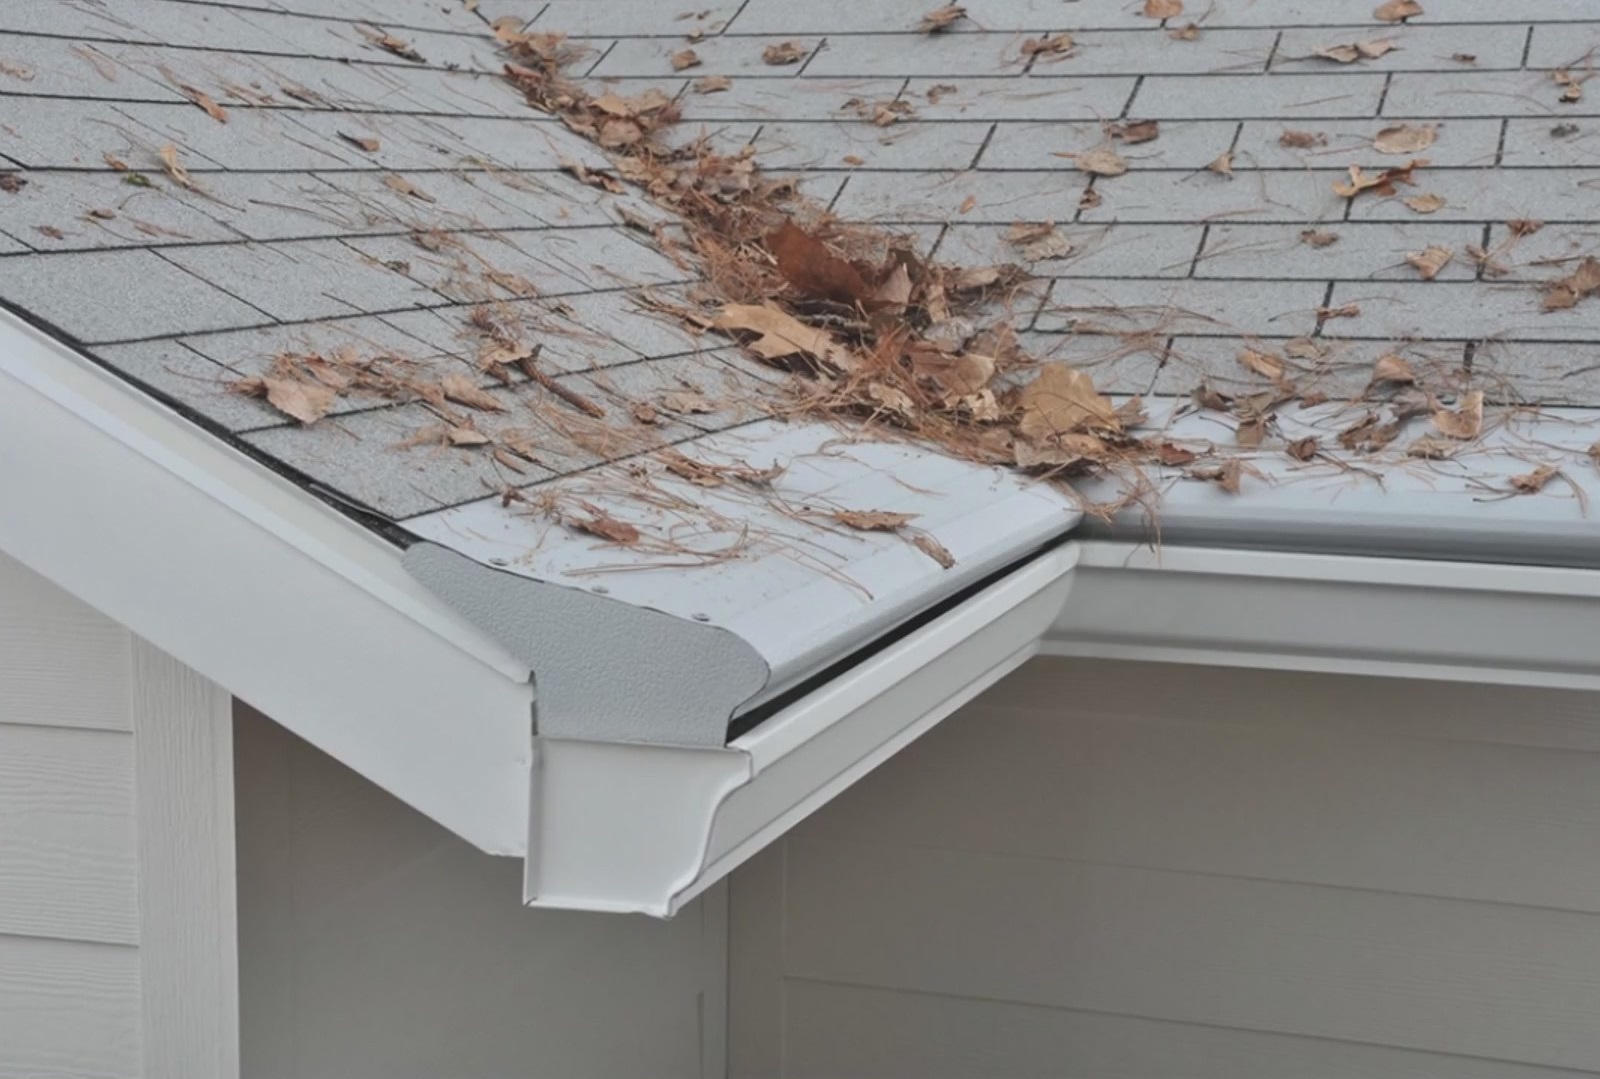 Gutter Guard Solutions - Carolina Home Remodeling Specialists